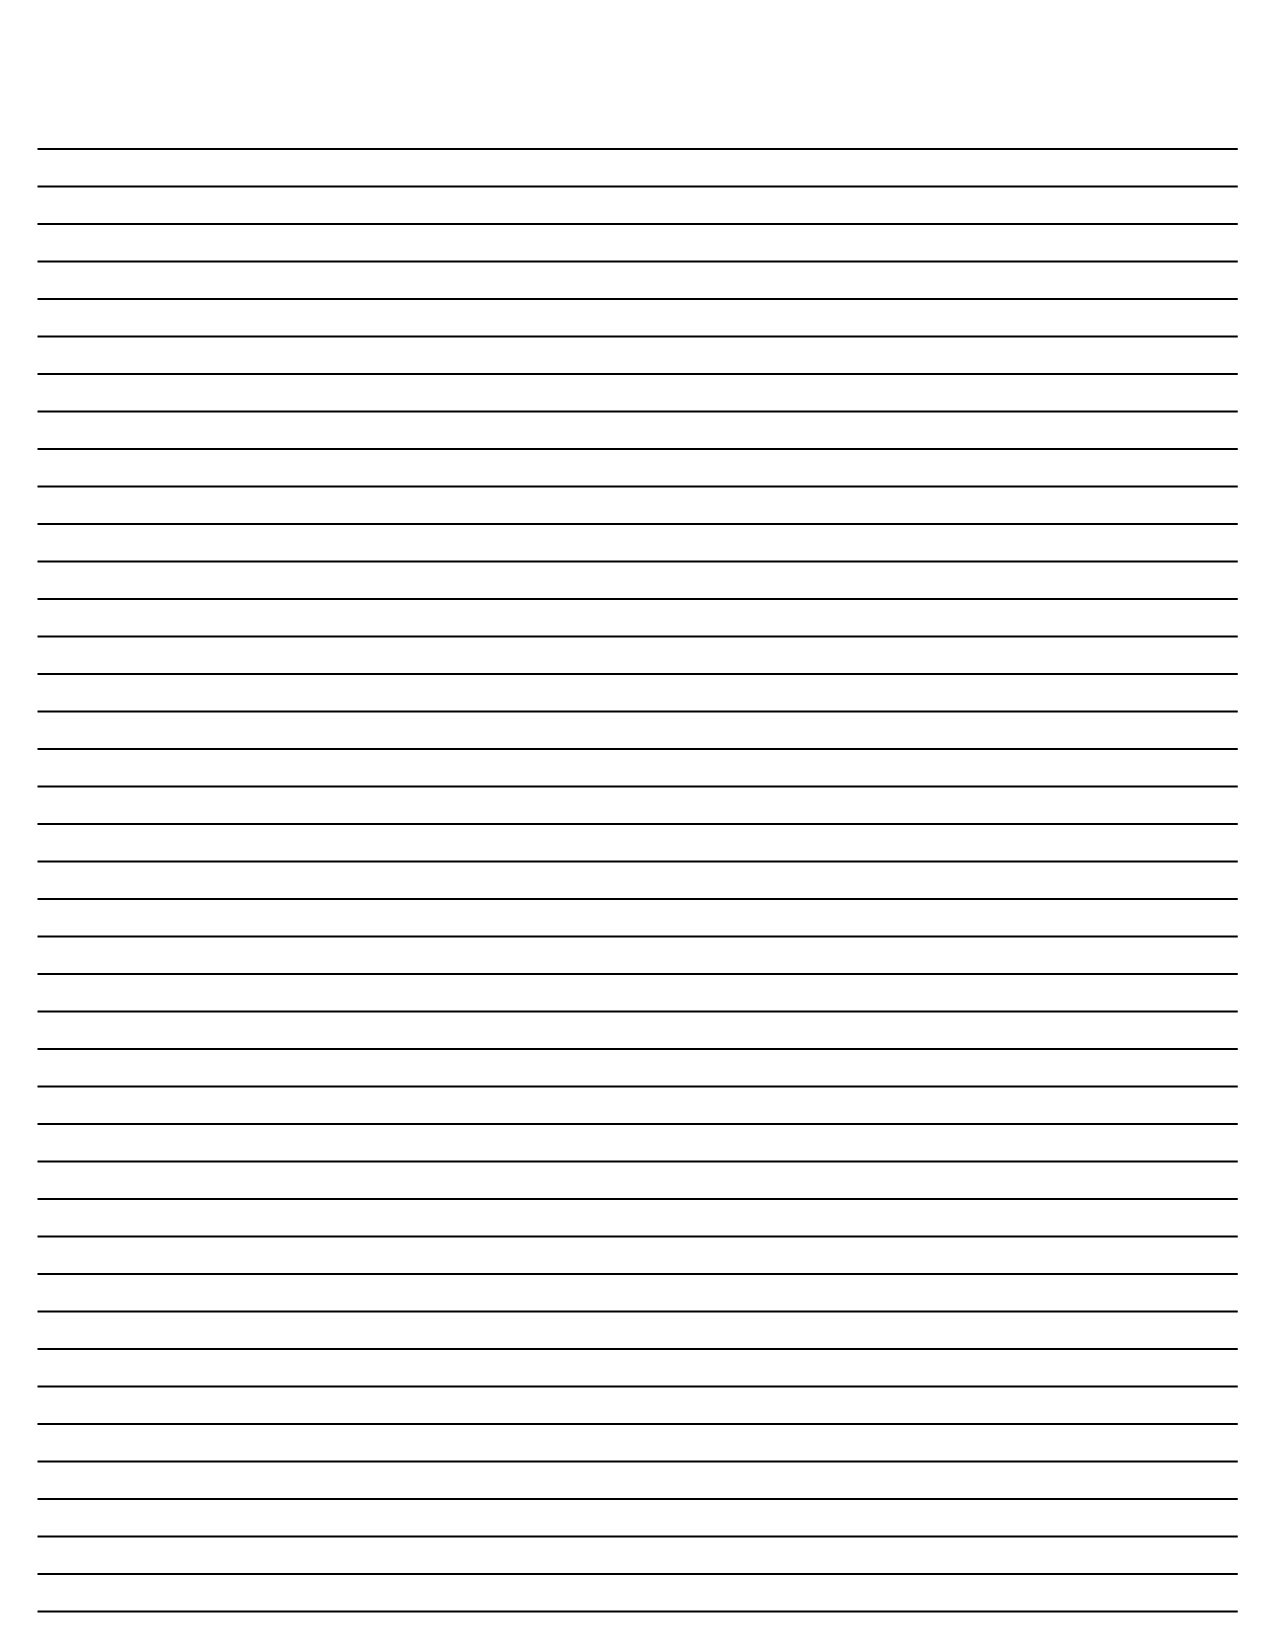 Blank Lined Paper Free Printable